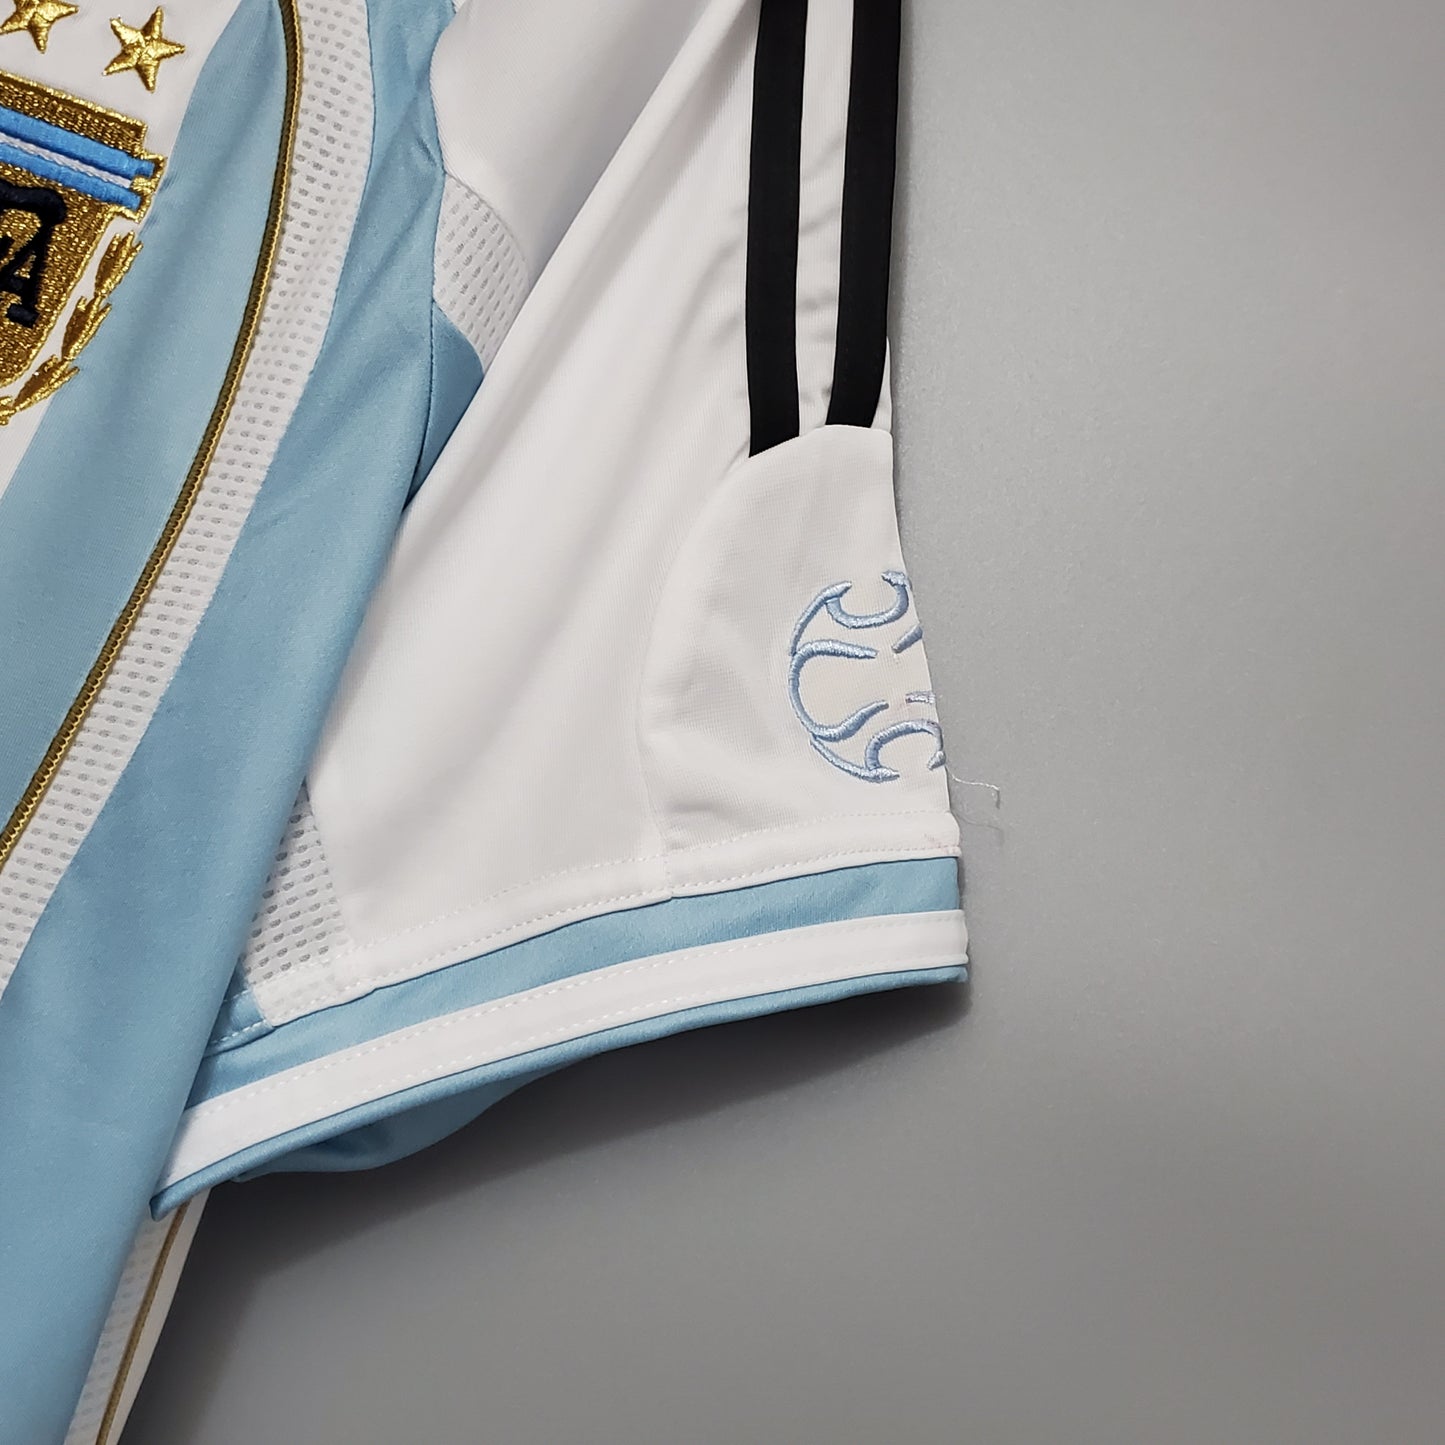 Argentina 2006 Home Jersey